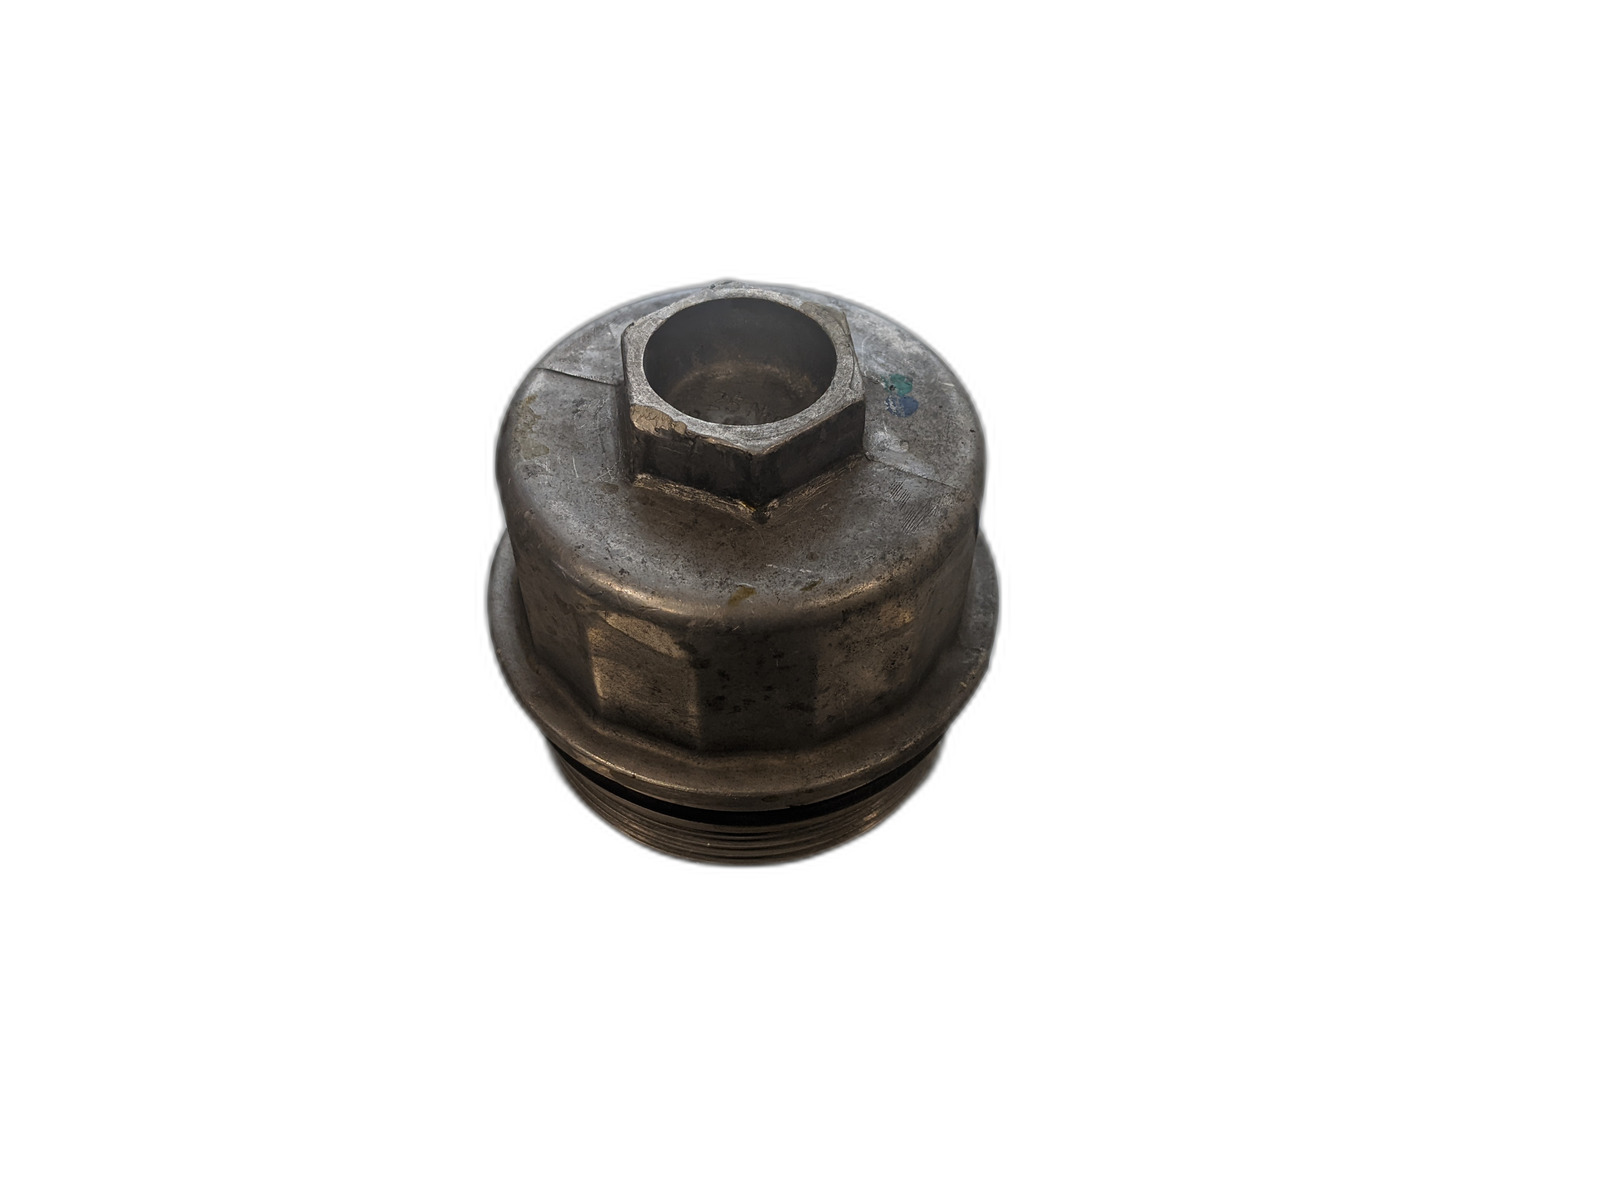 Oil Filter Cap From 2004 Mini Cooper S 1.6  Supercharged - $34.95